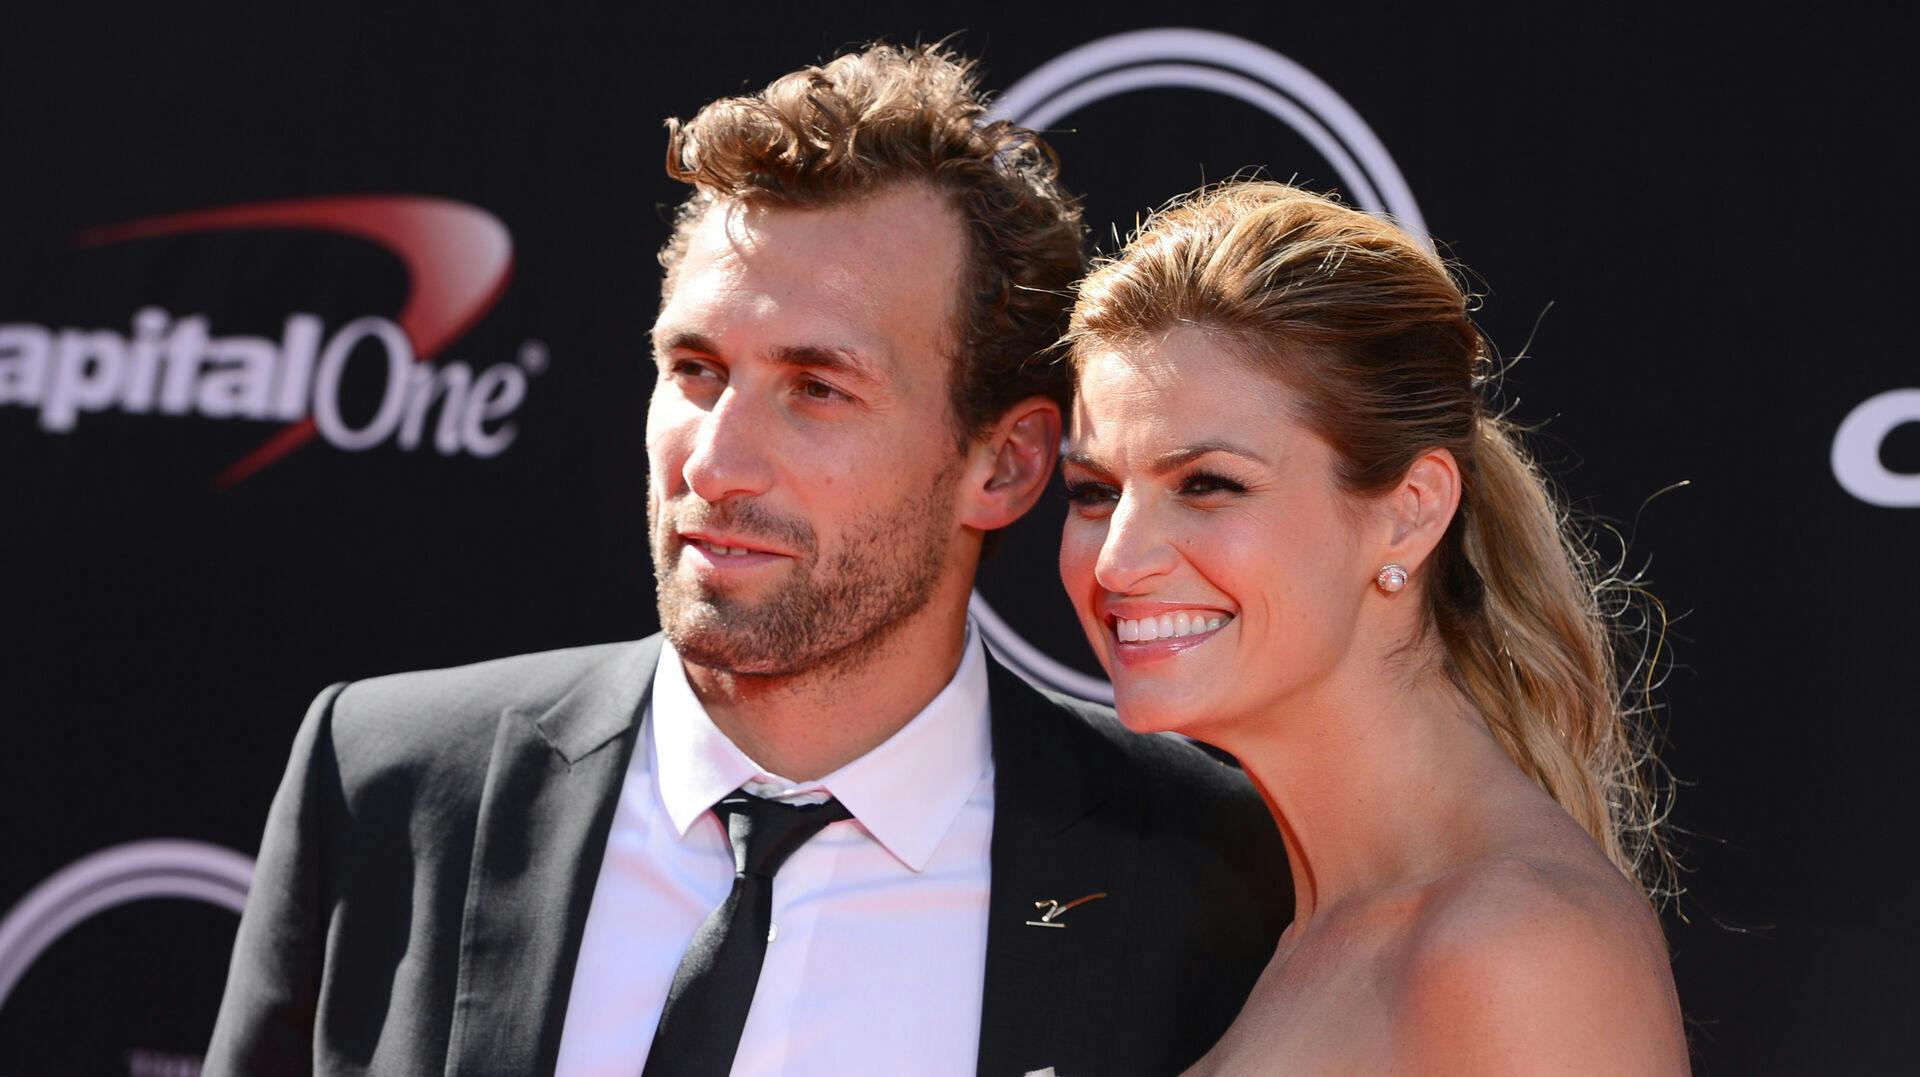 Hockey player Jarret Stoll and TV personality Erin Andrews arrive at the ESPY Awards at the Nokia Theatre on Wednesday, July 16, 2014, in Los Angeles. (Photo by Jordan Strauss/Invision/AP)